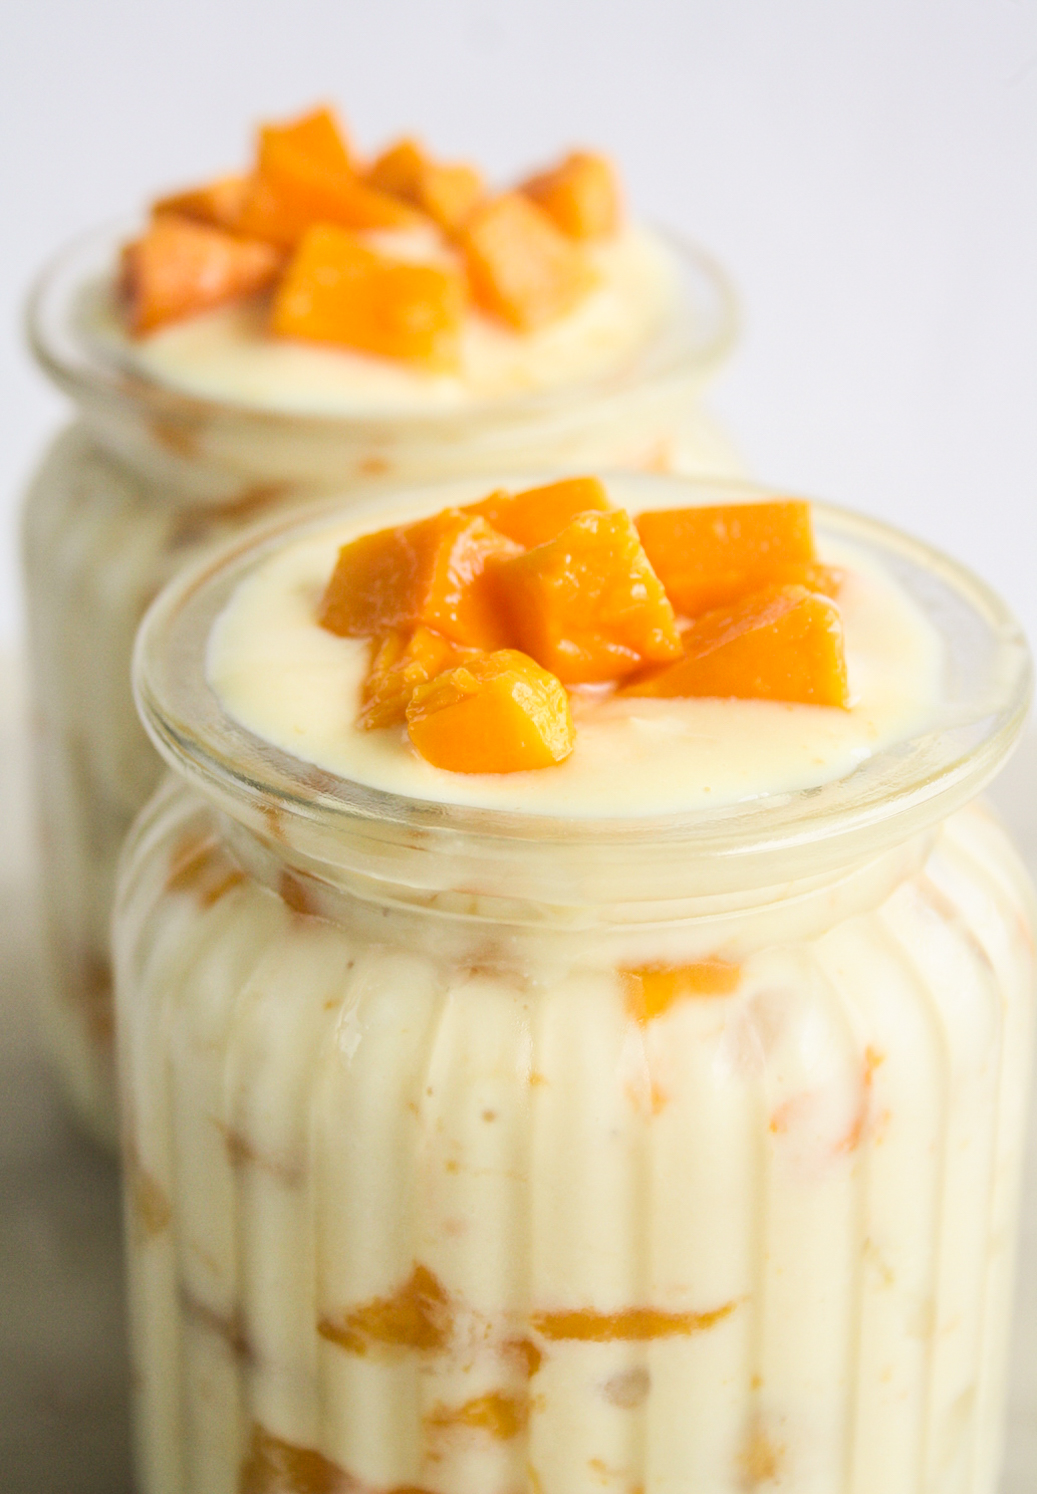 Easy instant custard layered with ladyfinger biscuits, fresh mango and banana